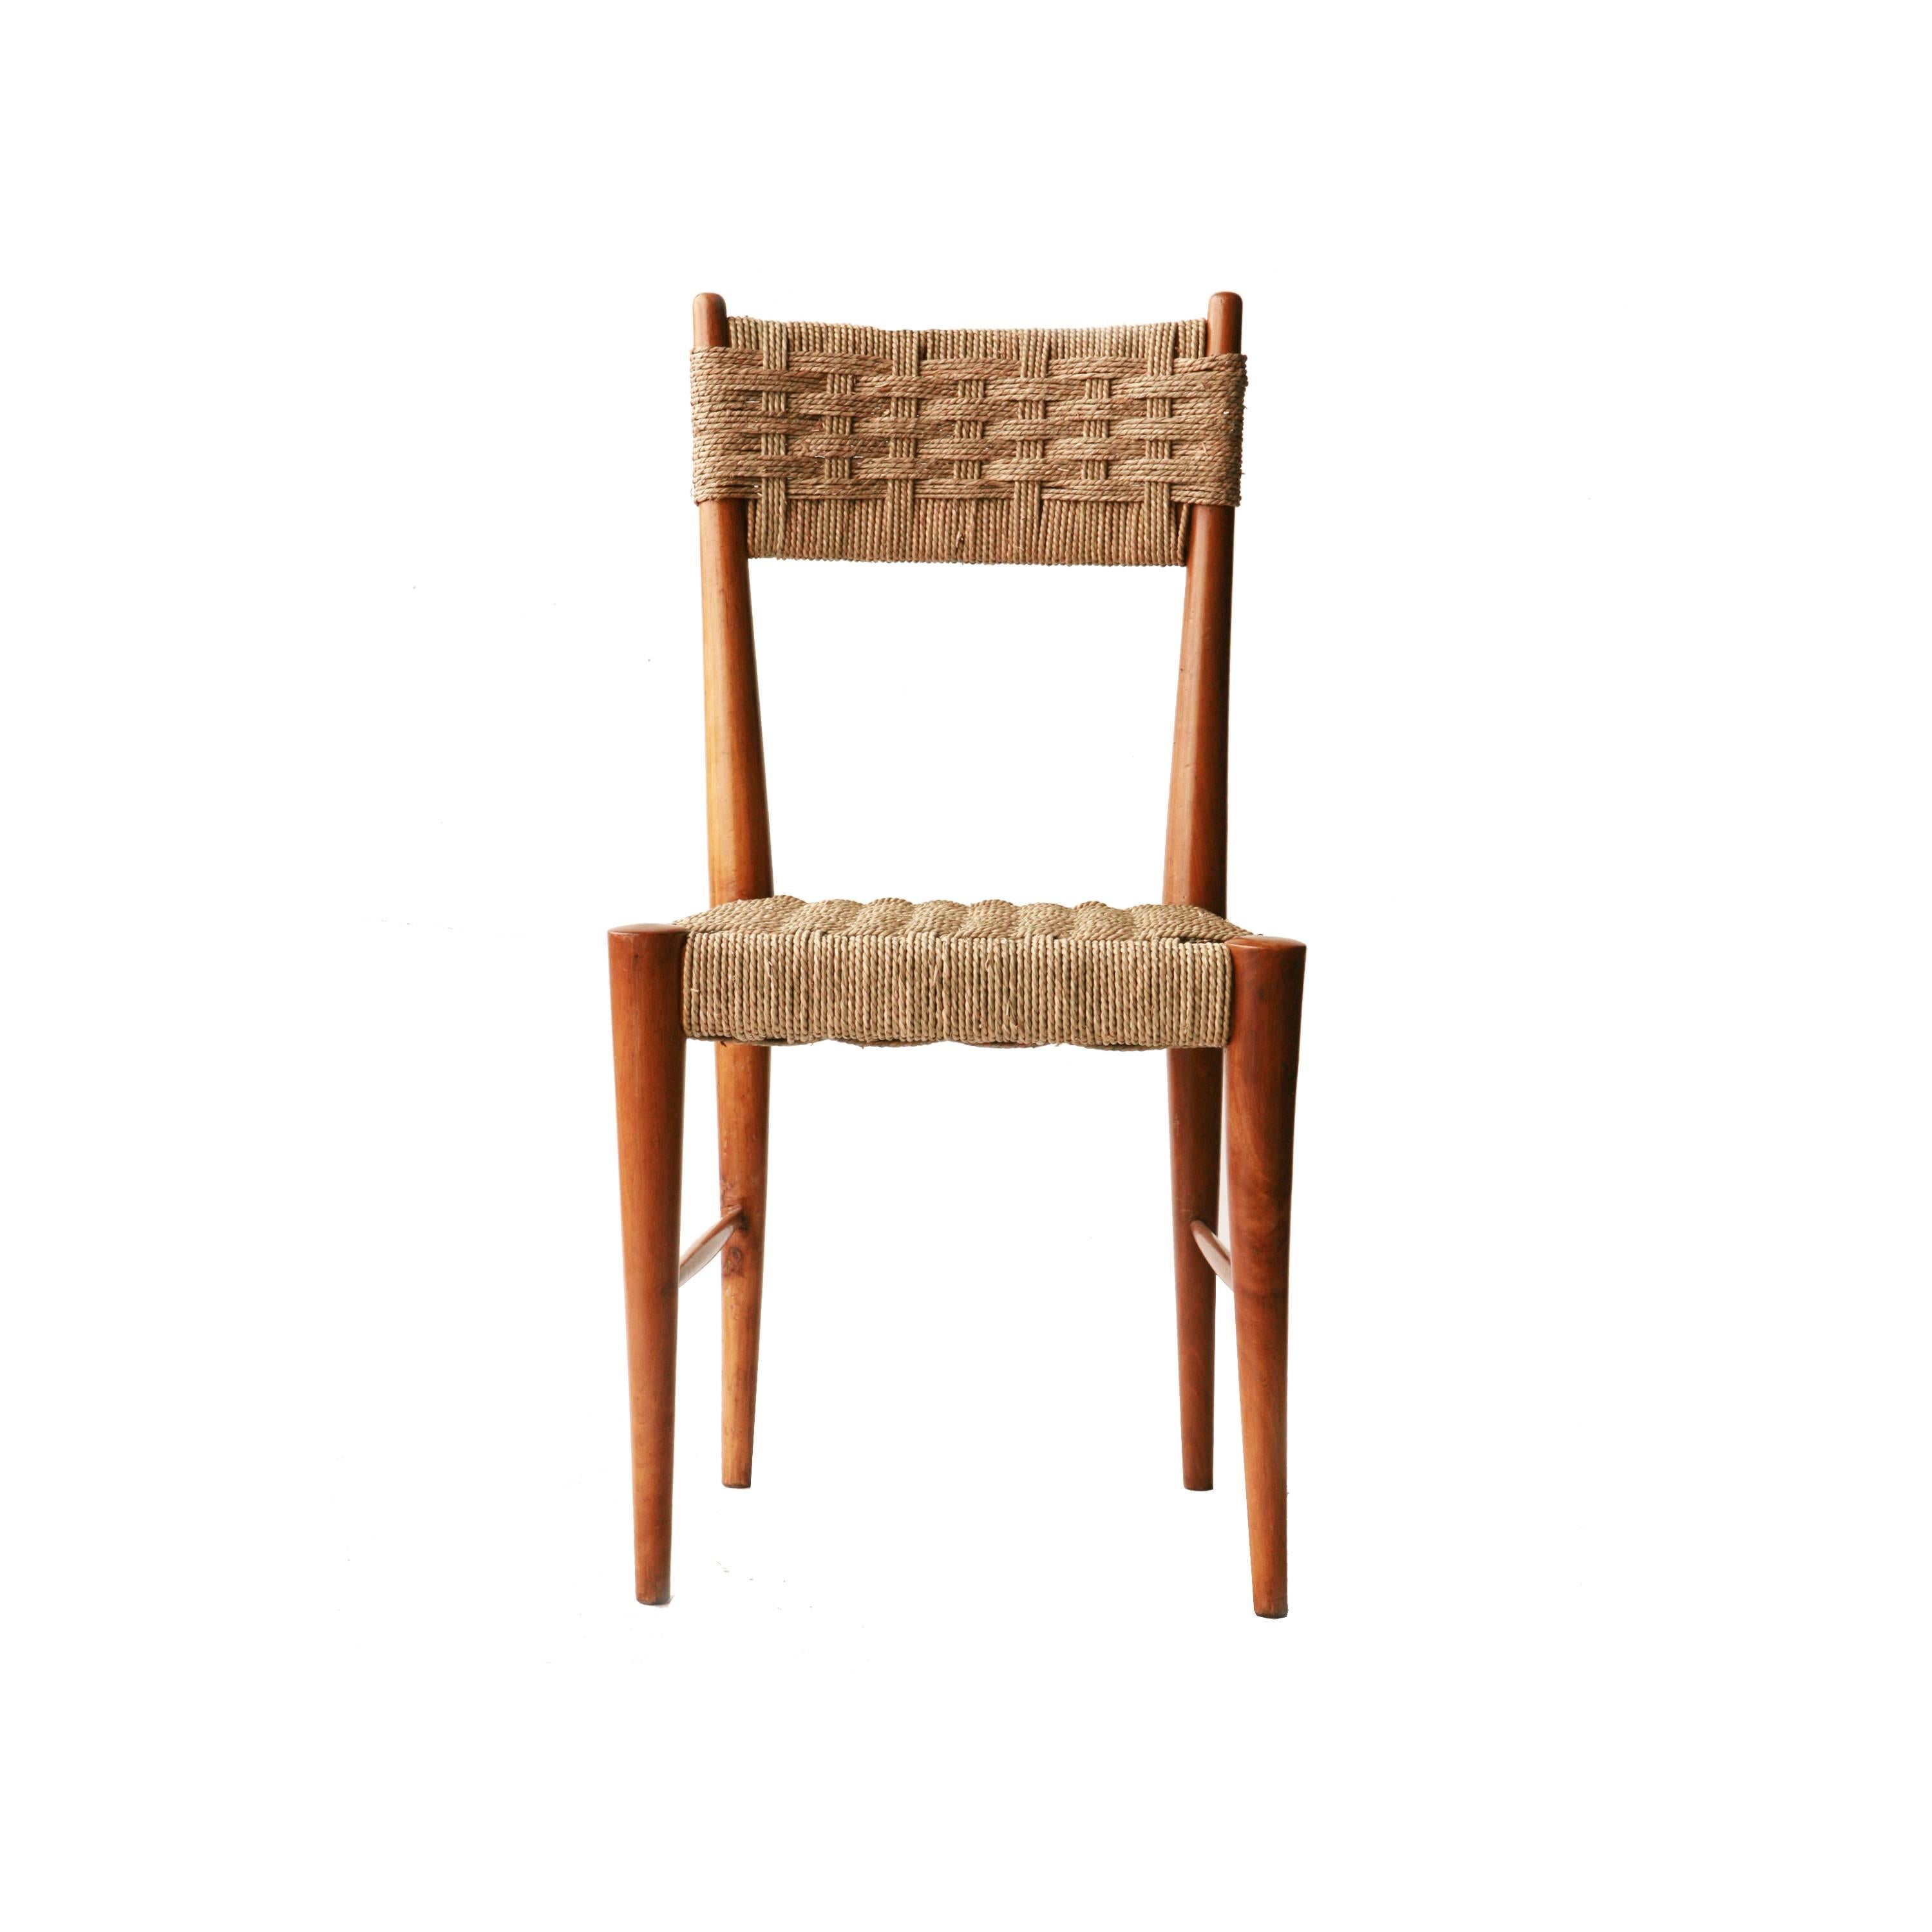 Mid-Century Modern Set of Six Chairs with Wooden Structure and Natural Fiber, Italia, 1950